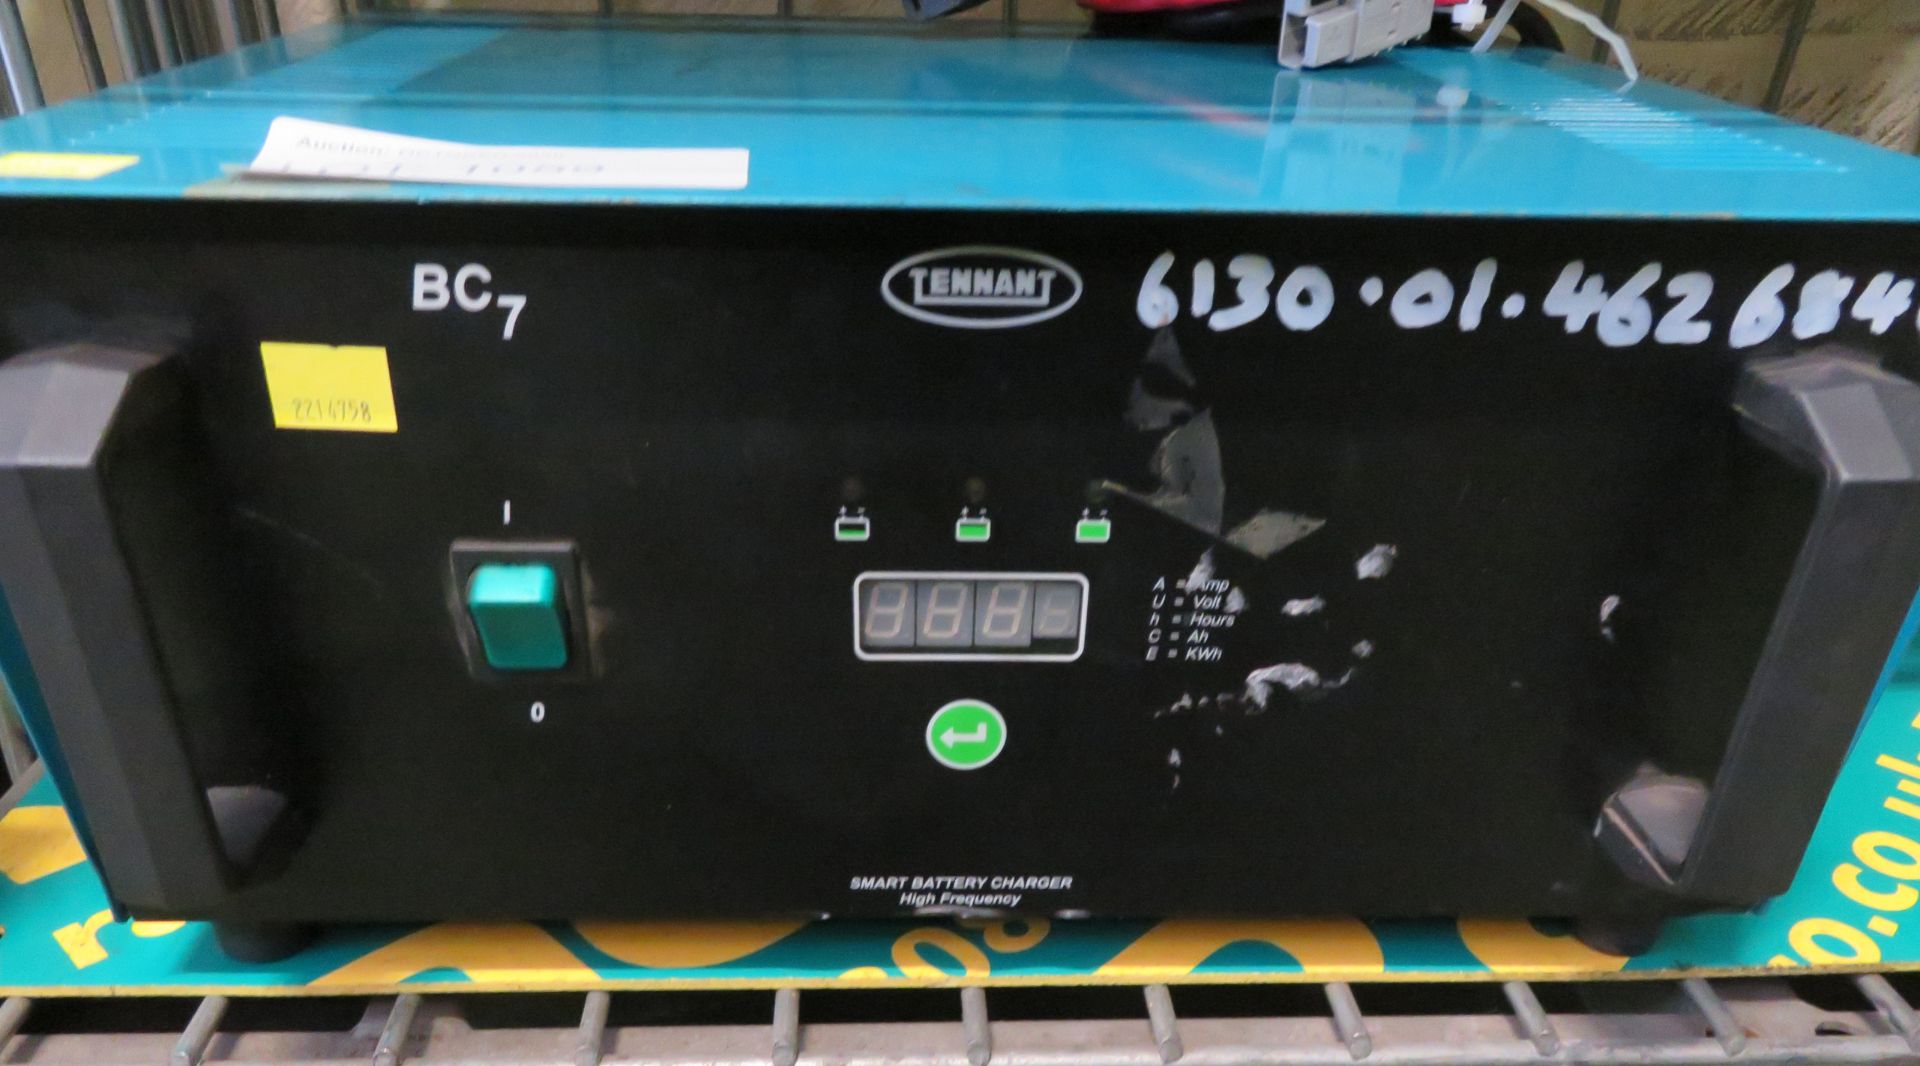 Tennant BC7 Smart Battery Charger - Image 3 of 3